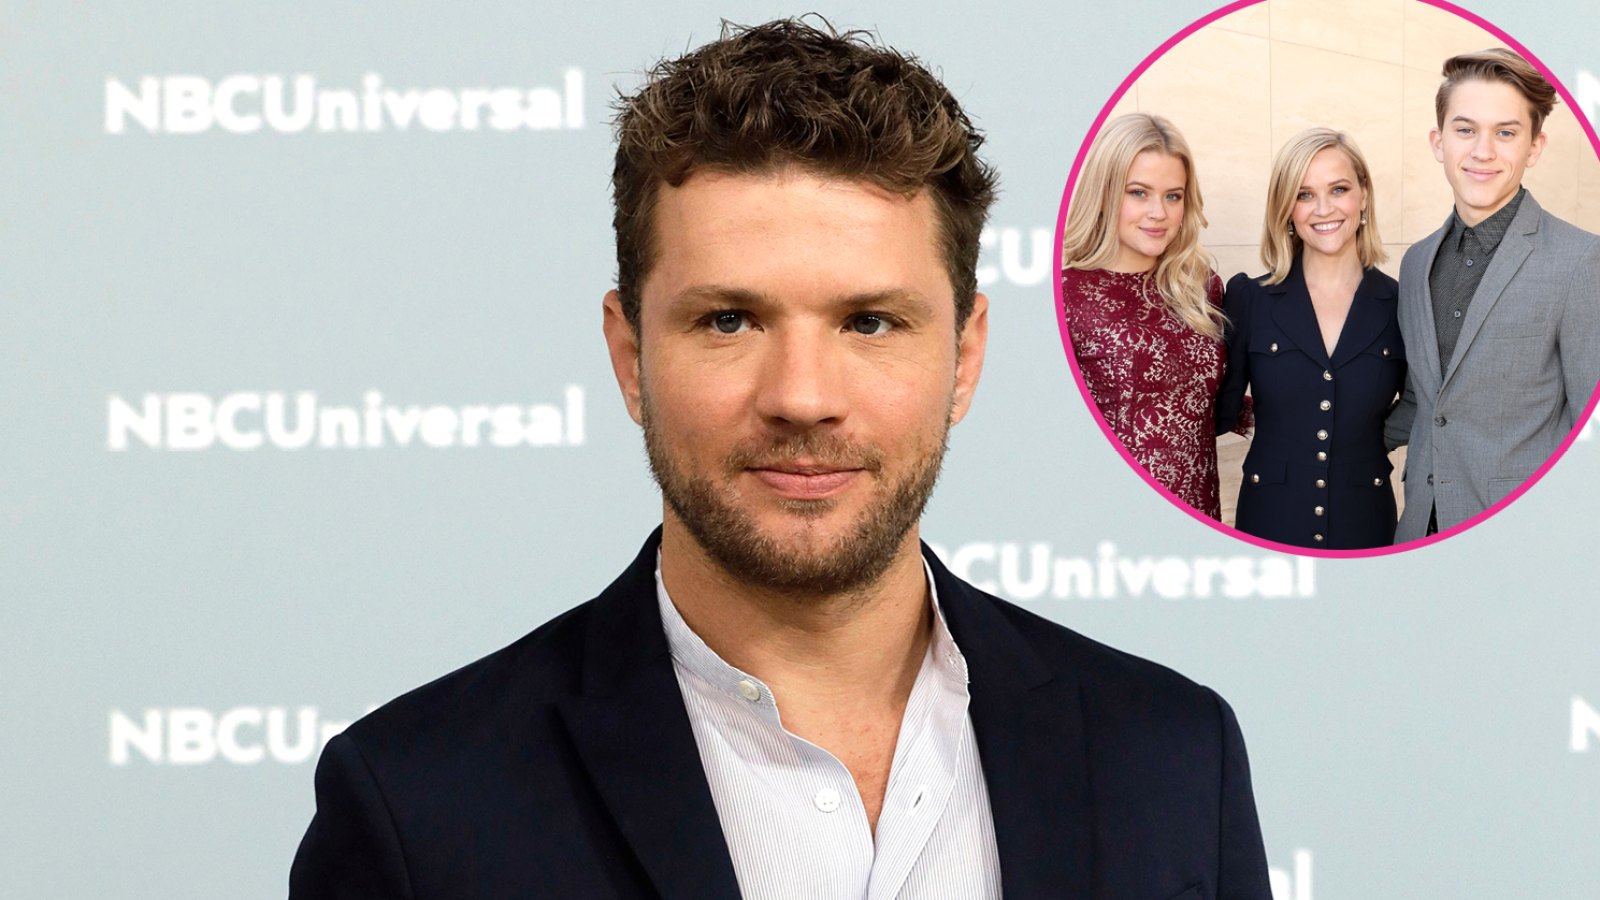 Ryan Phillippe Reveals If Kids Ava and Deacon Look More Like Him or Ex-Wife Reese Witherspoon